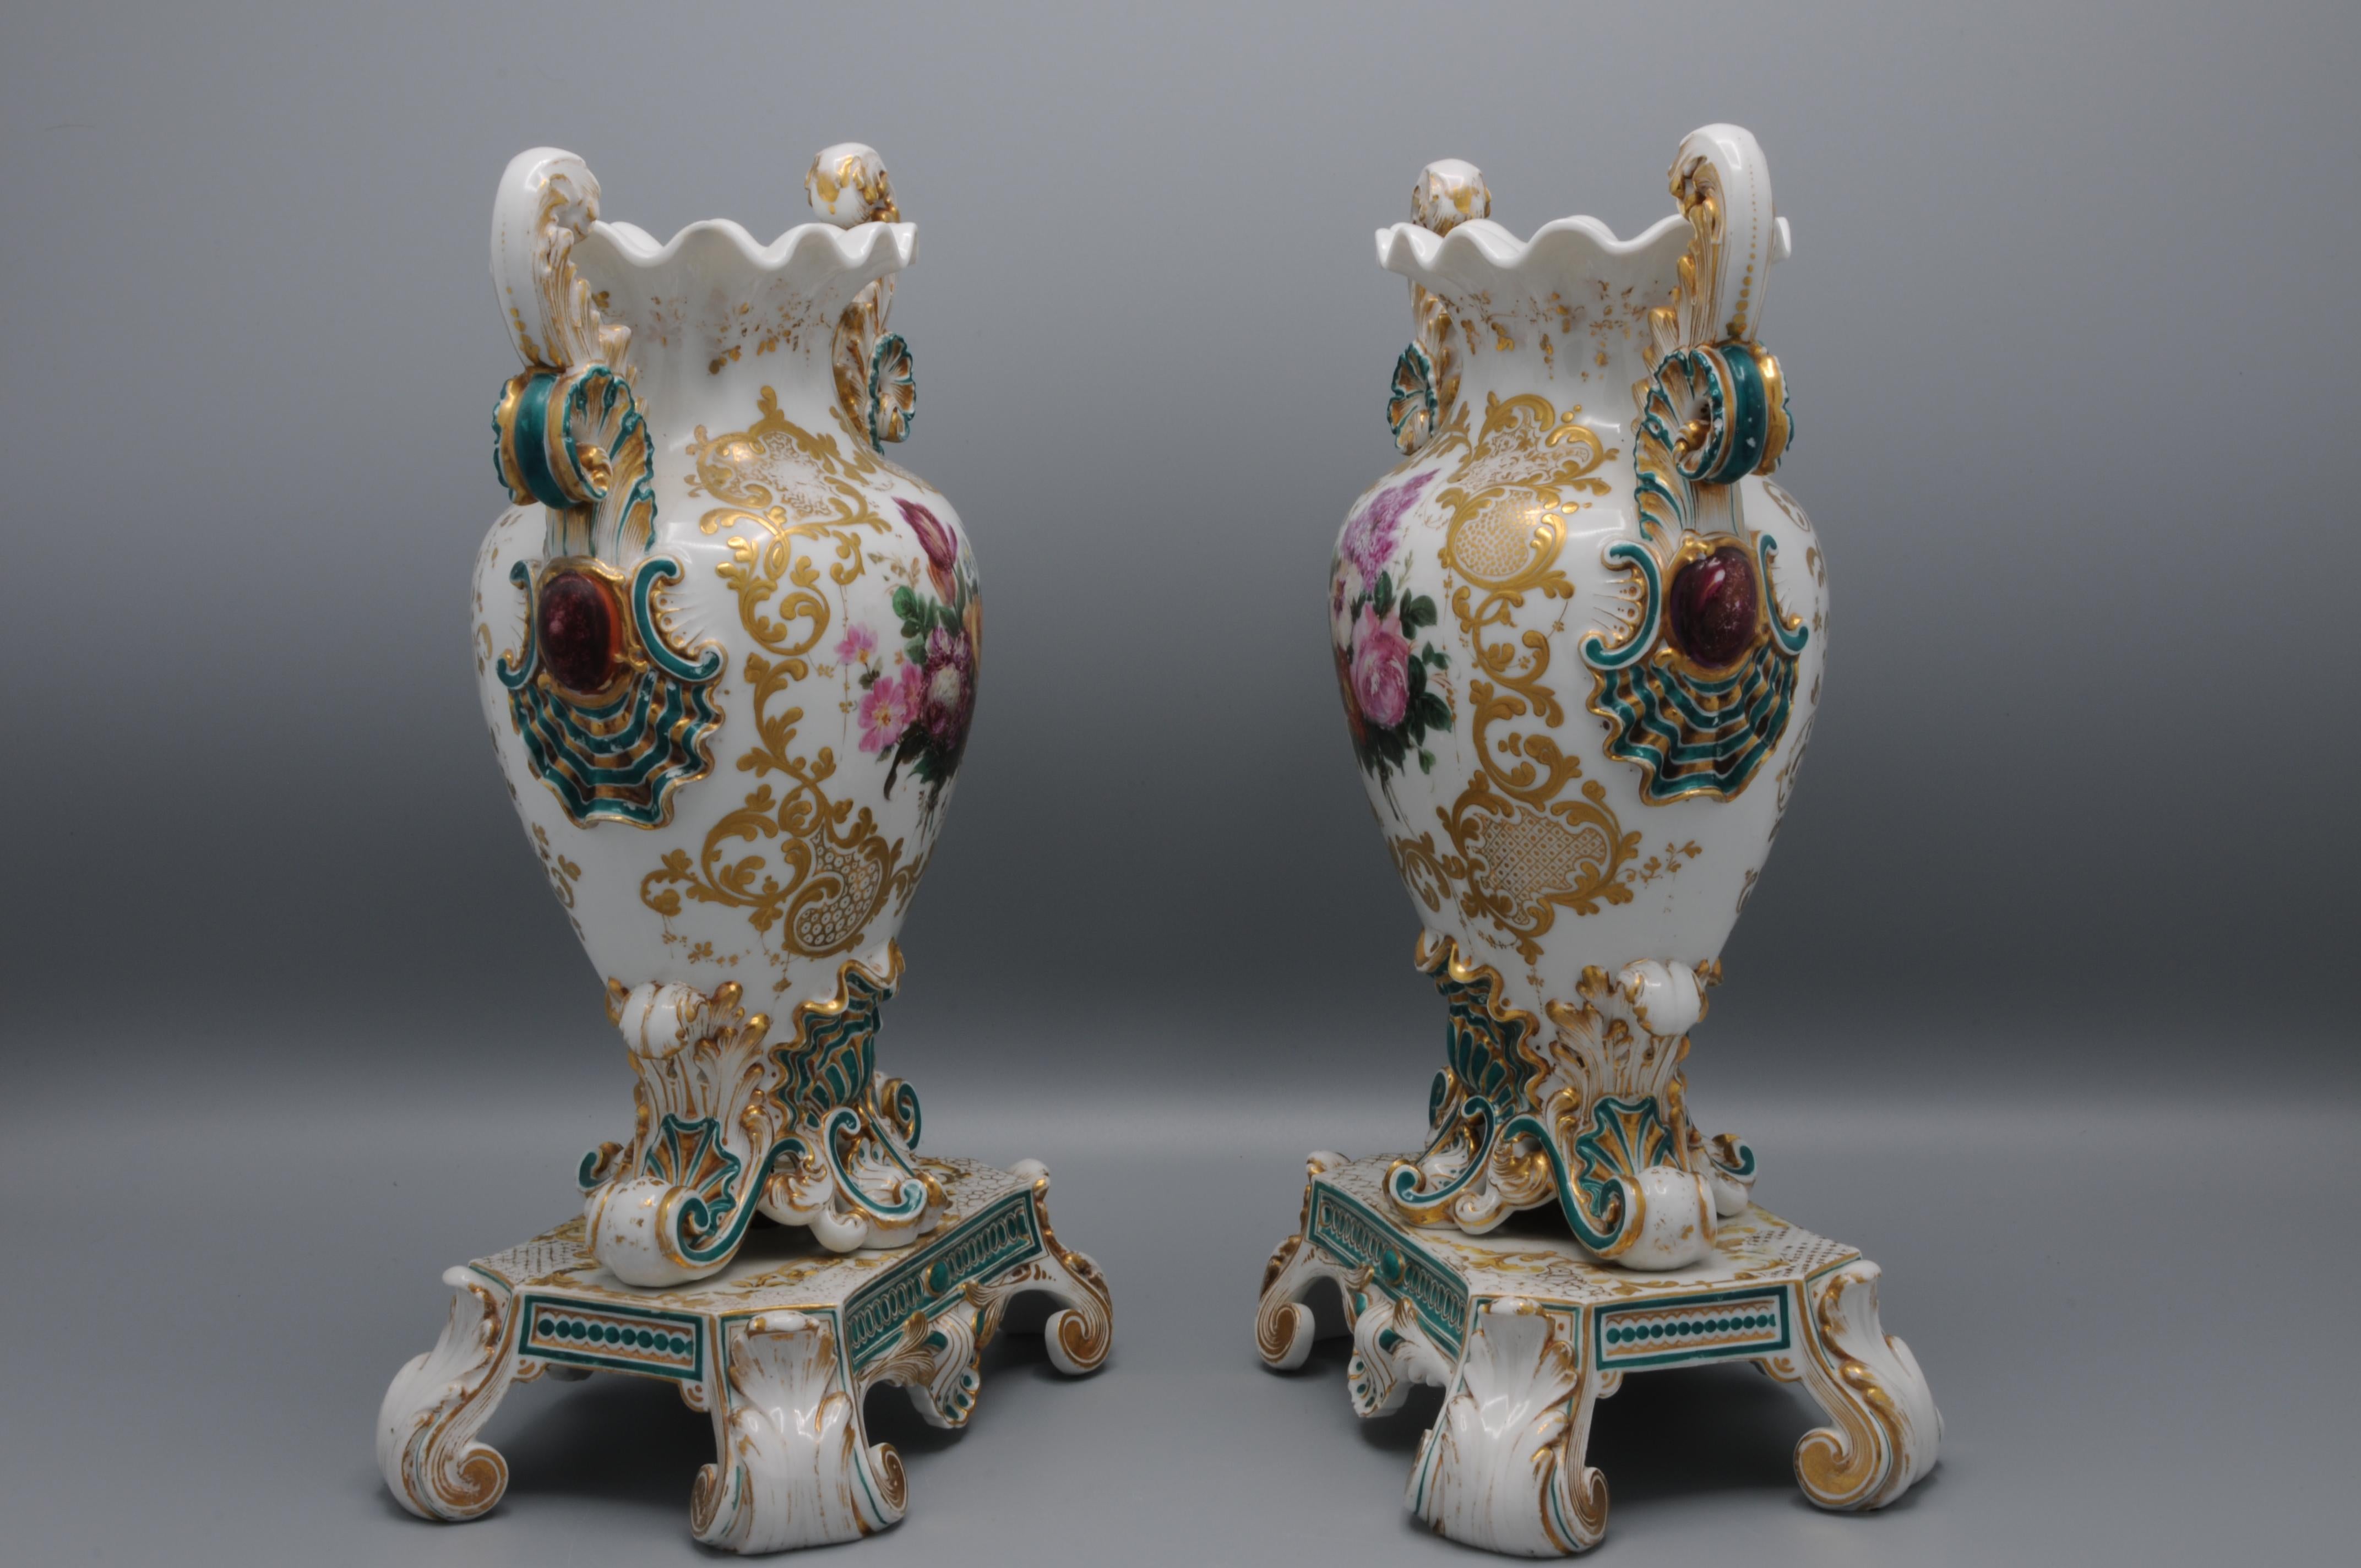 Gilt Jacob Petit (1796-1868) - Pair of Rococo Revival Vases For Sale